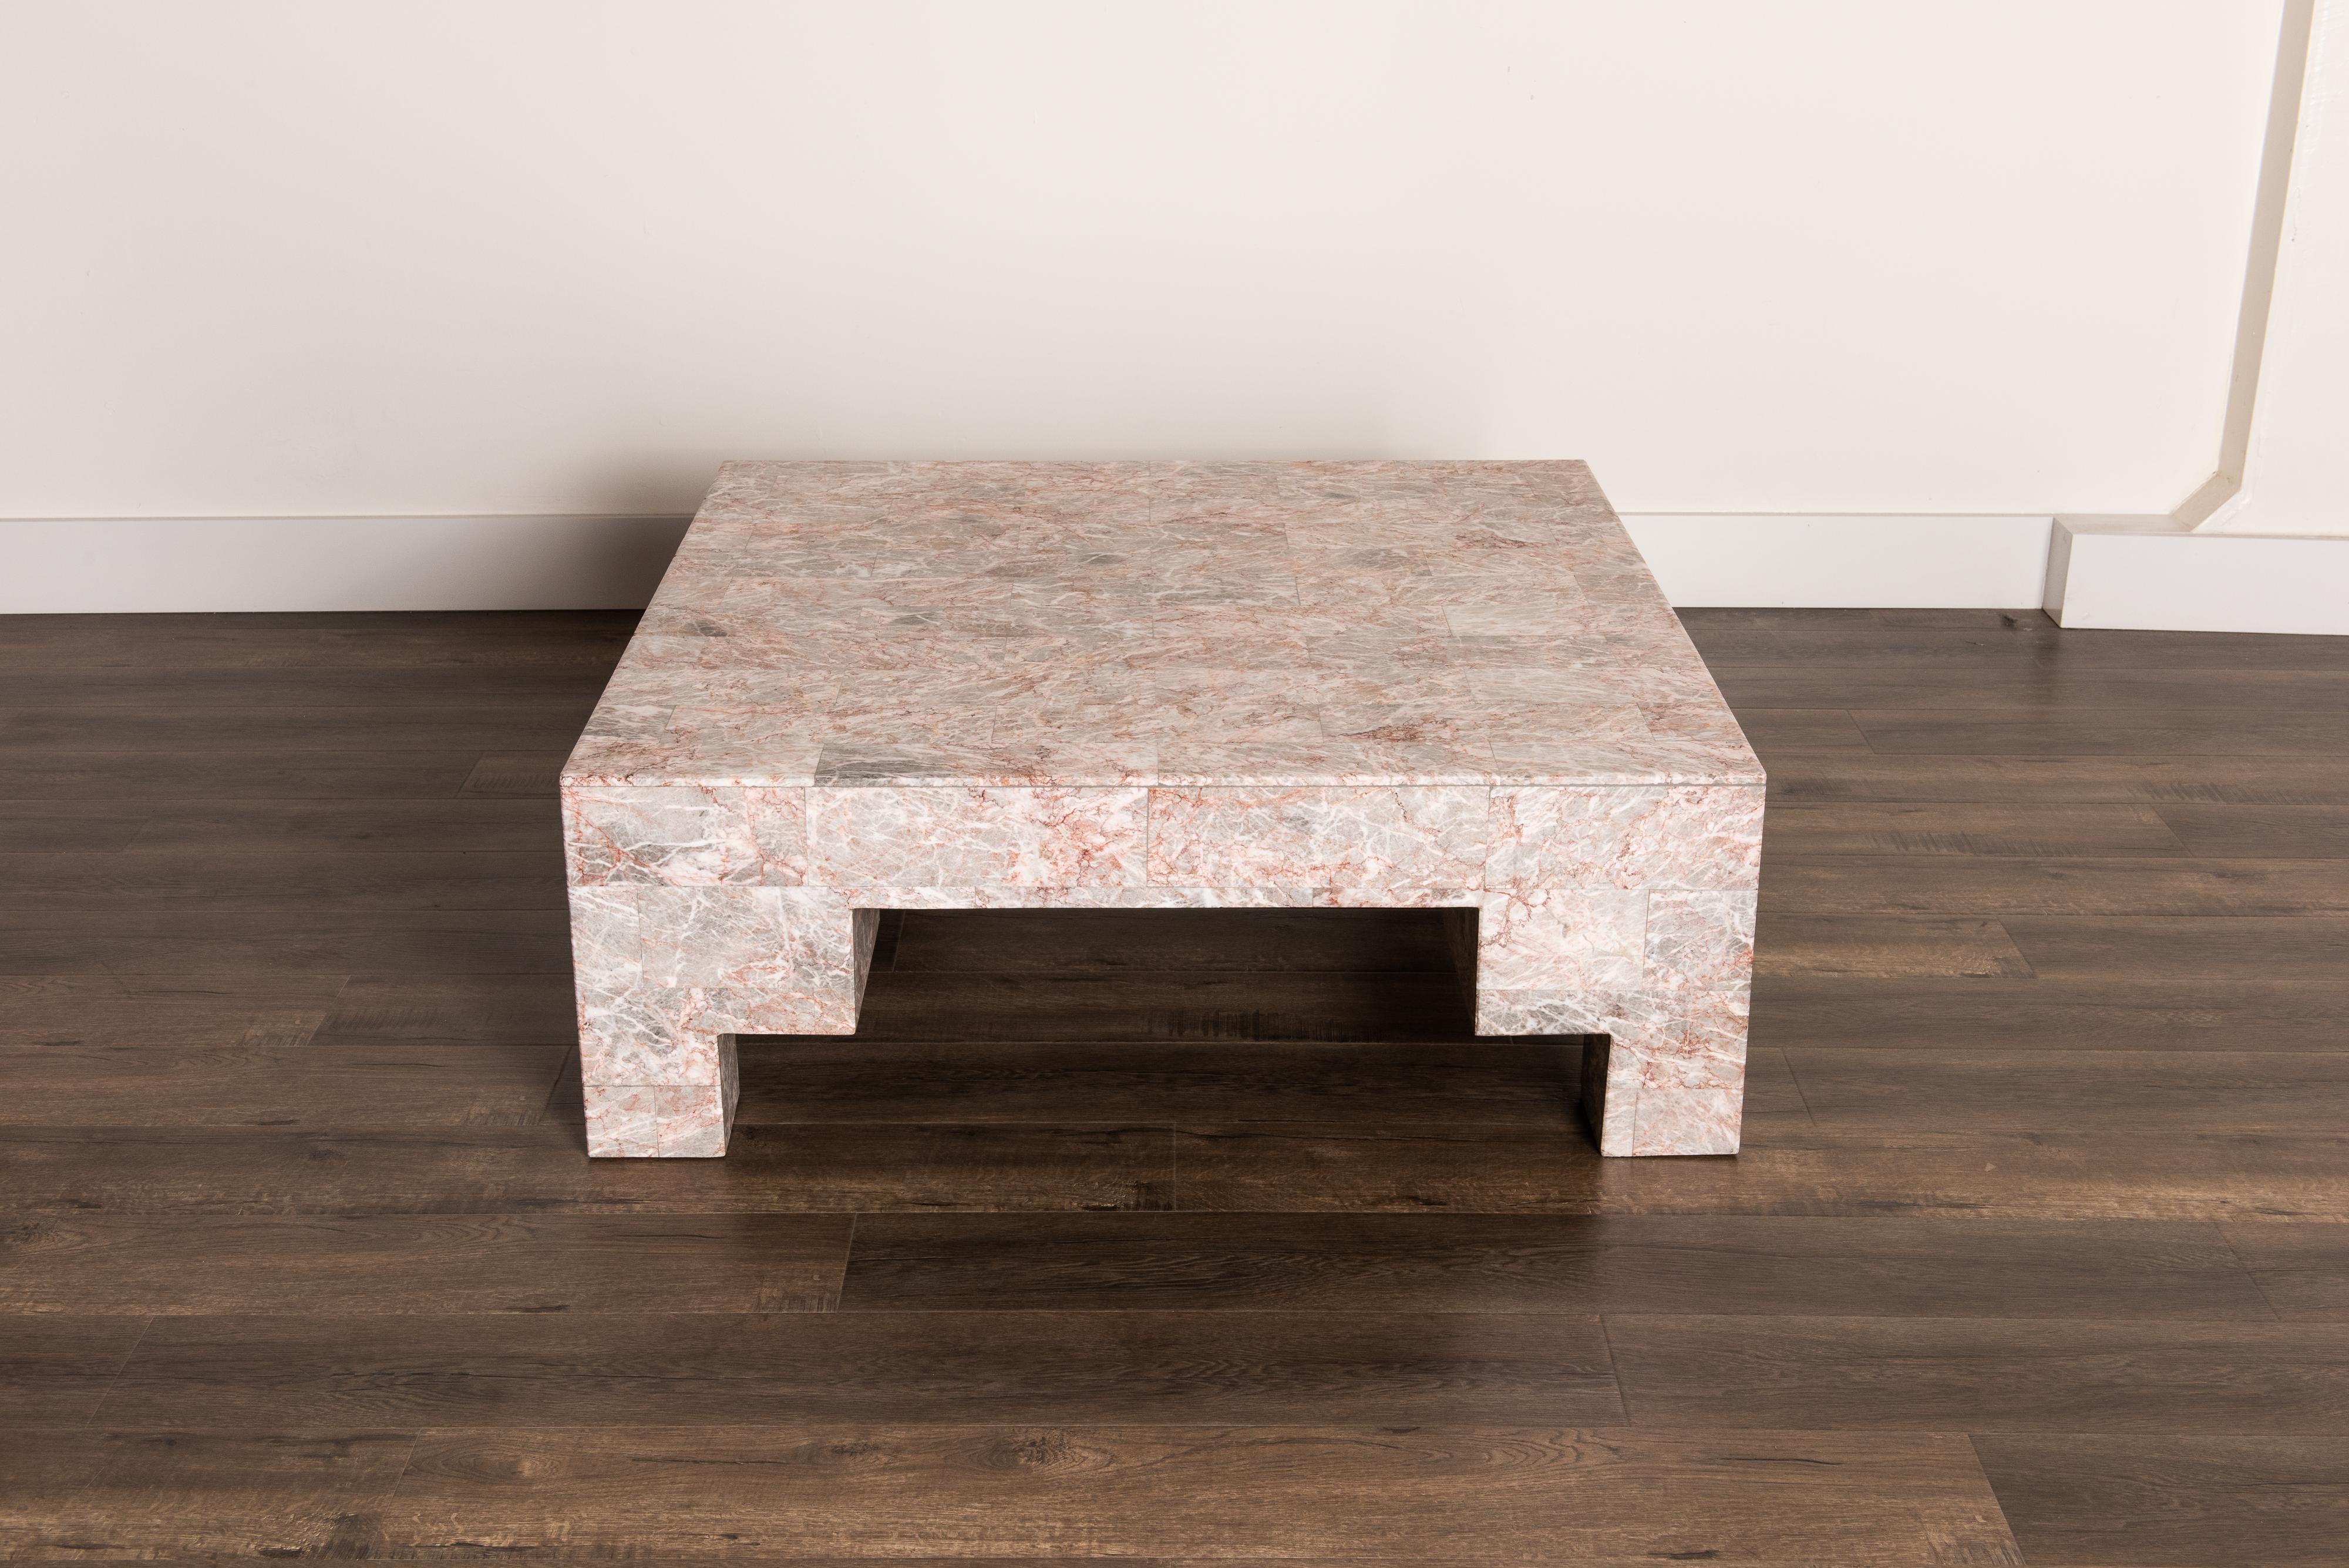 So gorgeous and designer on-trend, this heavy and substantial Post-Modern coffee table is constructed from rose pink and grey marble. The angled and architectural shape makes it perfect for a Postmodern room, while the beautiful marble stone veining